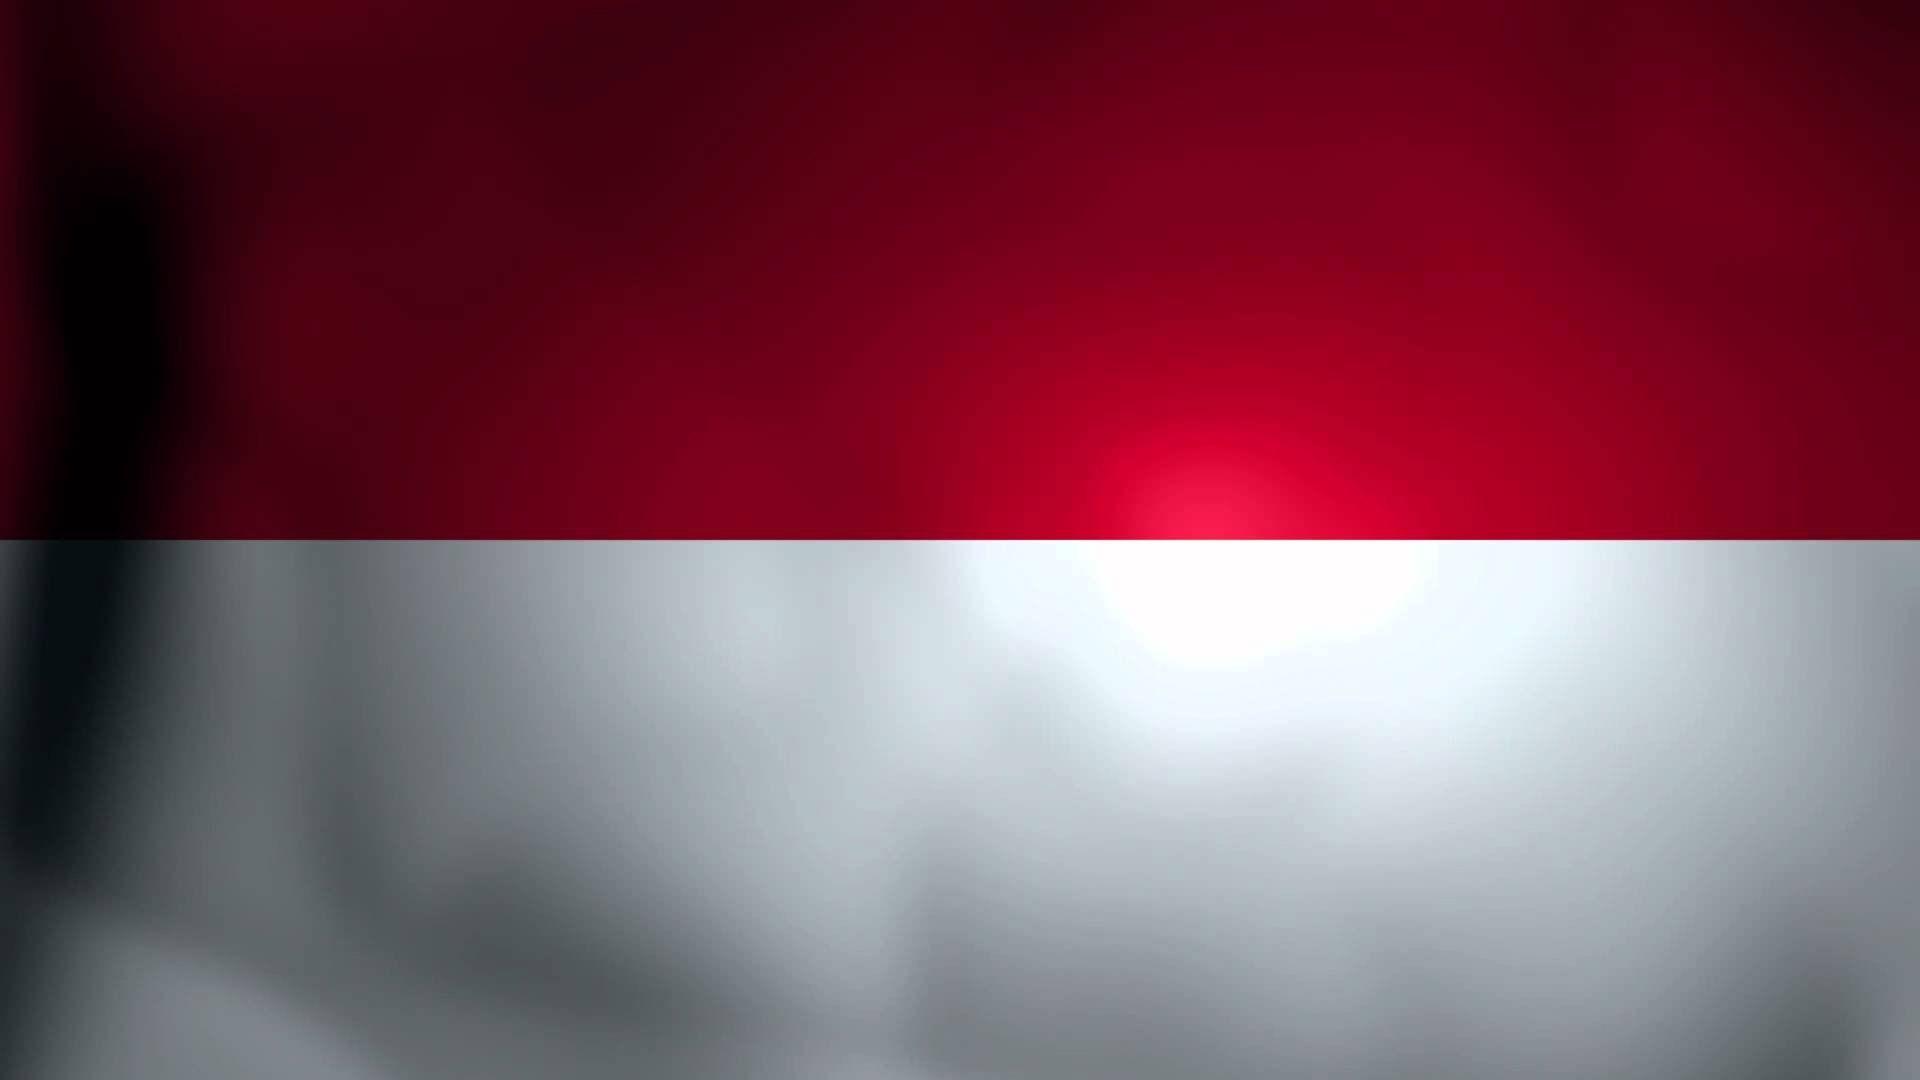 INDONESIAN FLAG indonesia flags wallpaperx1080